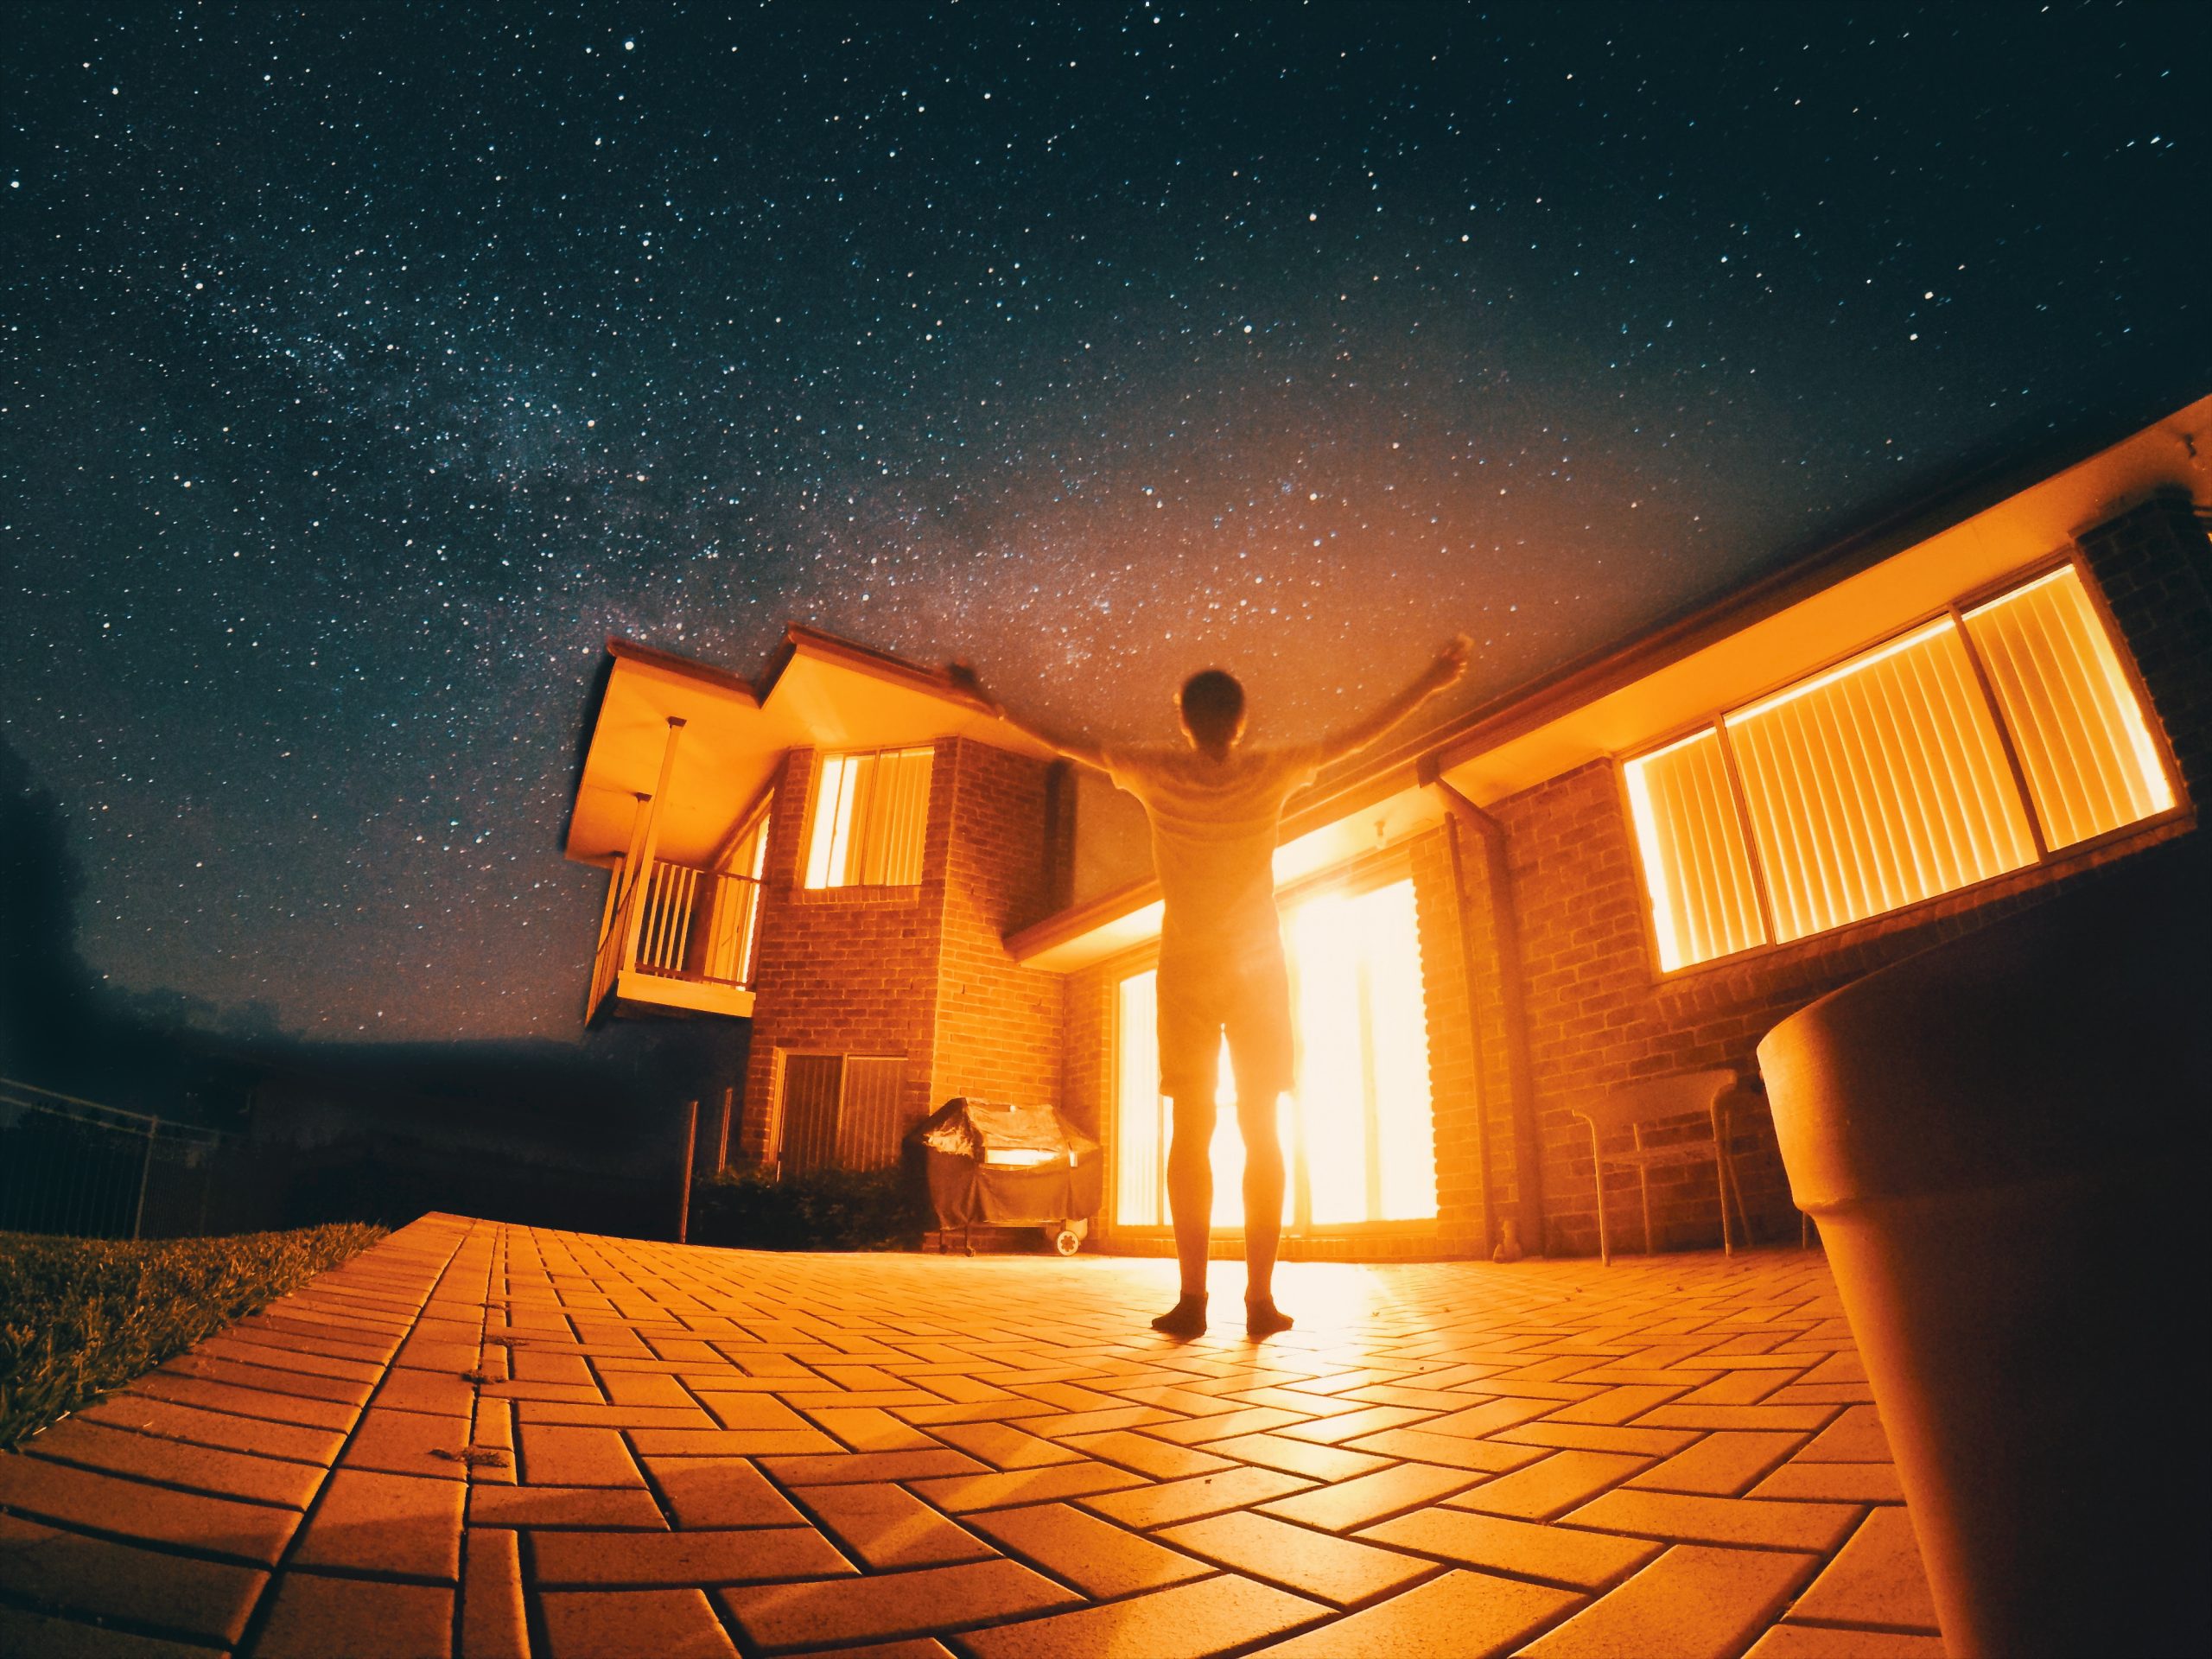 milky way galaxy over house photoshop